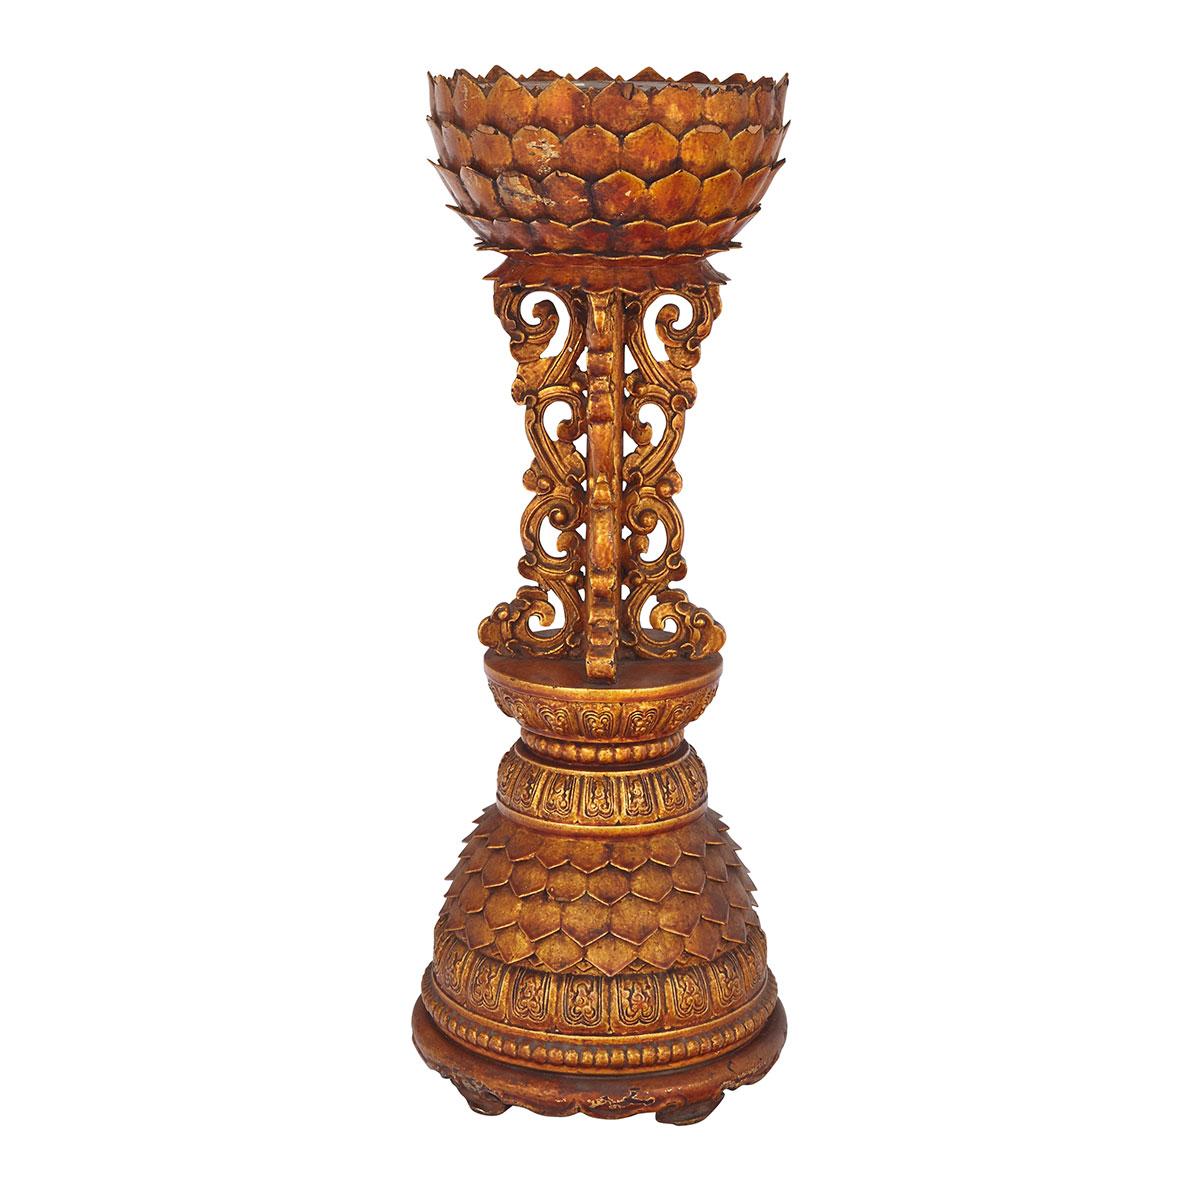 Large Gilt Lacquer Wood Lotus-Form Candle Pricket, 17th/18th Century